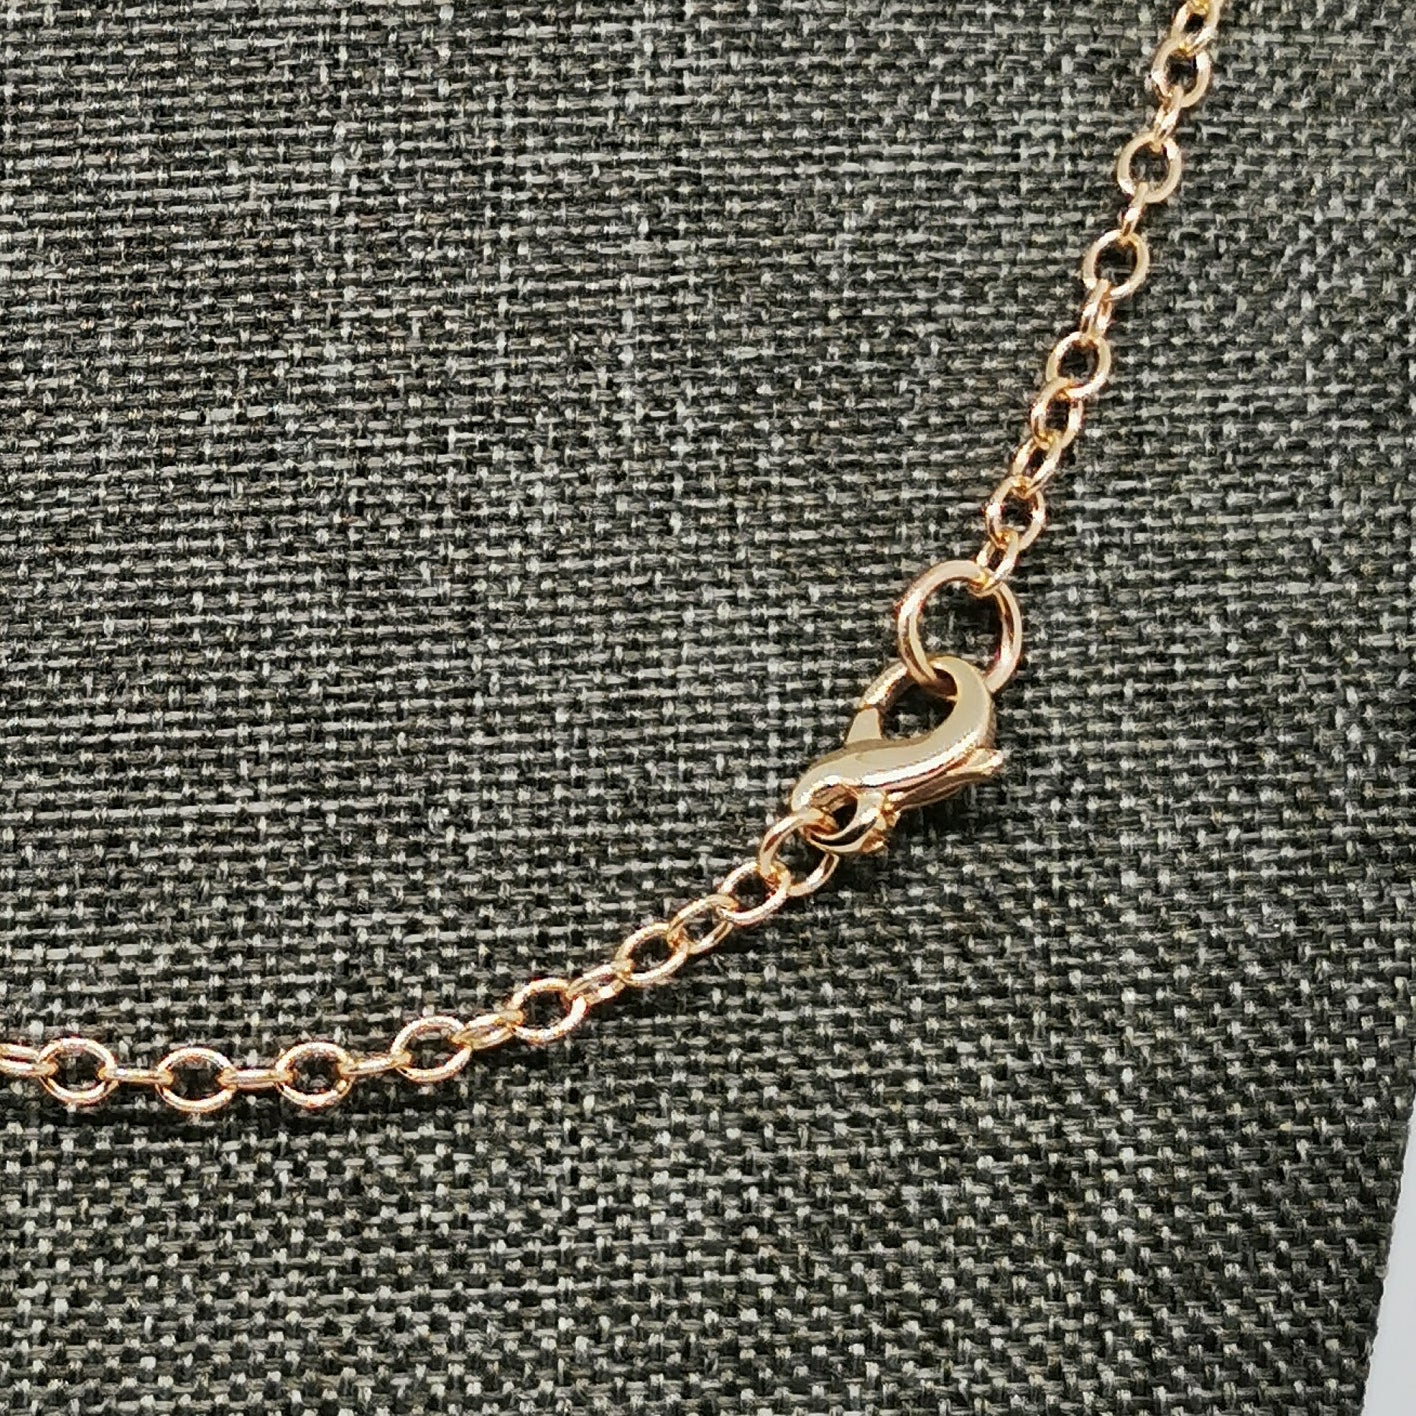 Antique Bronze Cable Chain 3mm Made to Order, bronze cable chain, bronze chain, cable chain, necklace chain, bronze necklace chain, 3mm chain, 3mm bronze chain, bronze chain jewelry, bronze chain jewellery, chain jewelry chain jewellery, bronze jewellery, bronze jewelry, 3mm chain necklace, 3mm bronze chain necklace